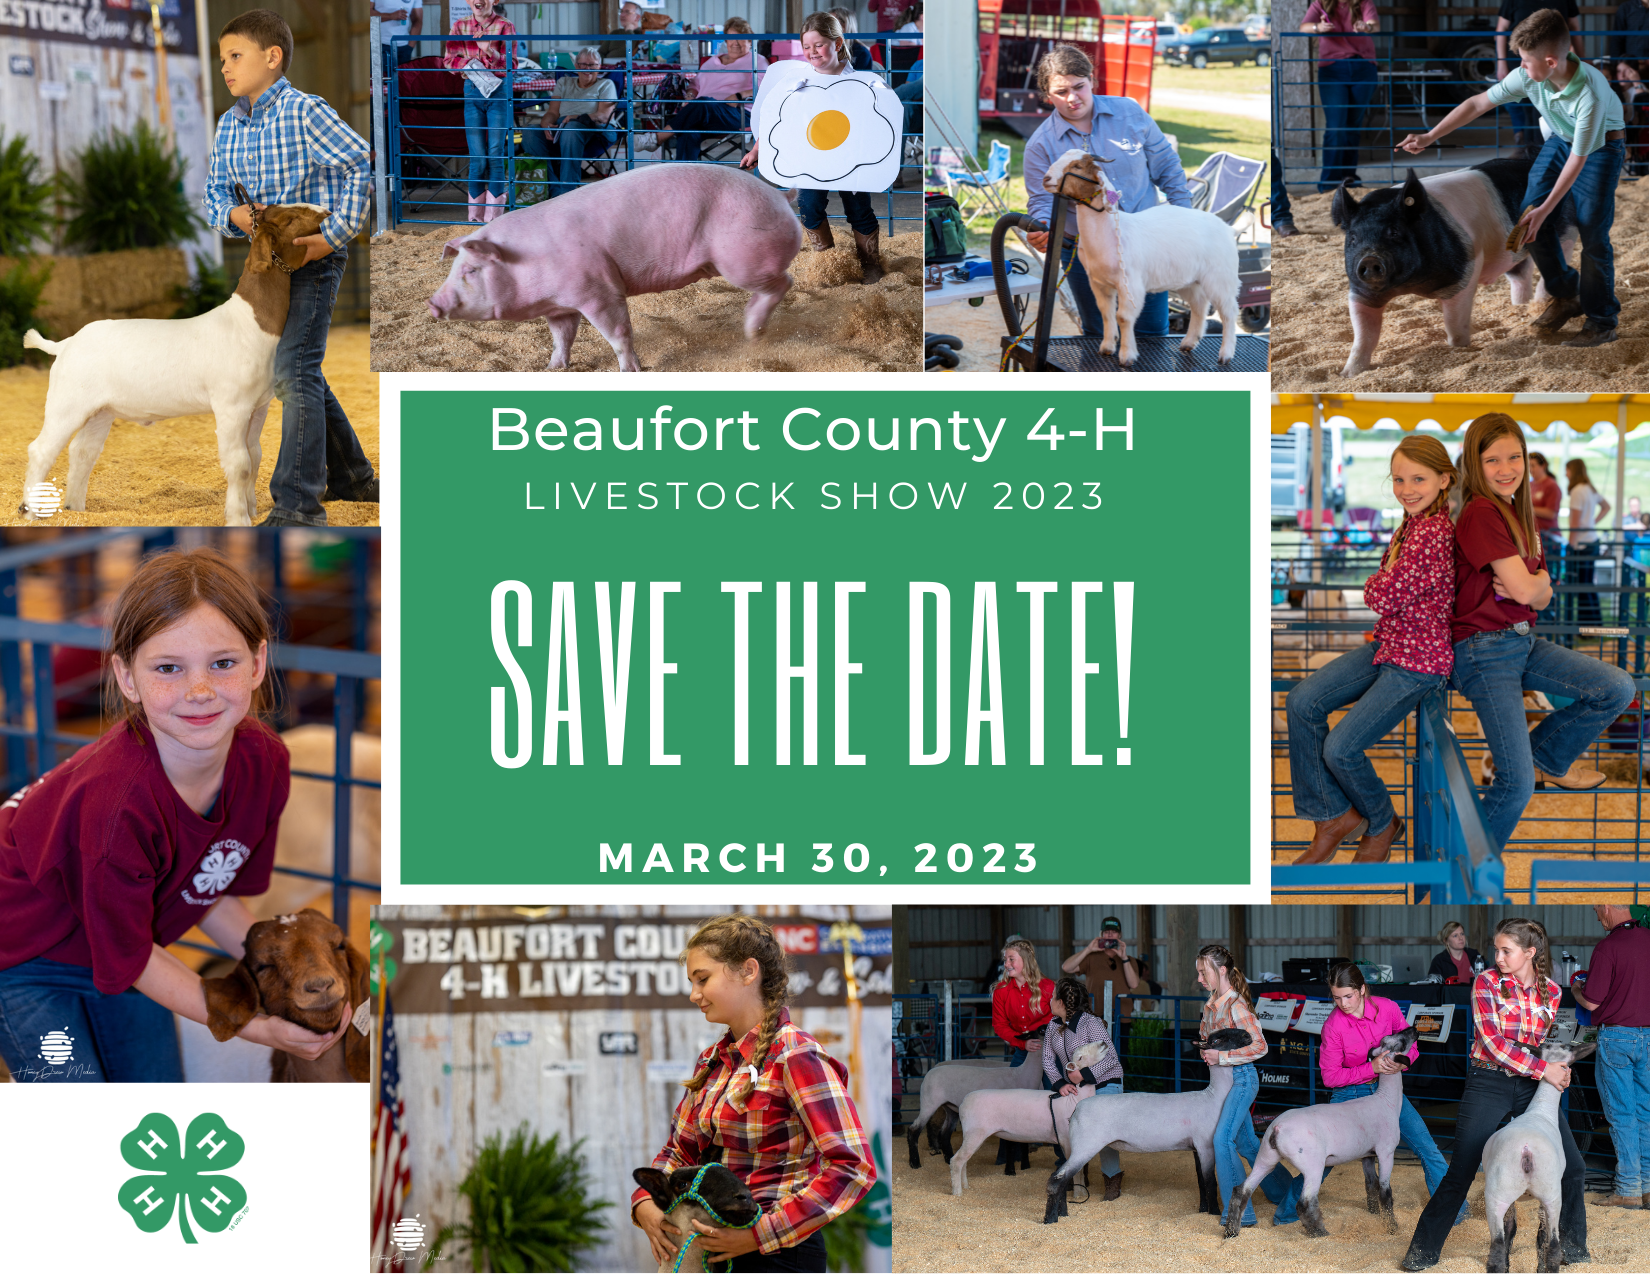 Save the Date for the 2023 Beaufort County 4-H Livestock Show and Sale. March 30, 2023